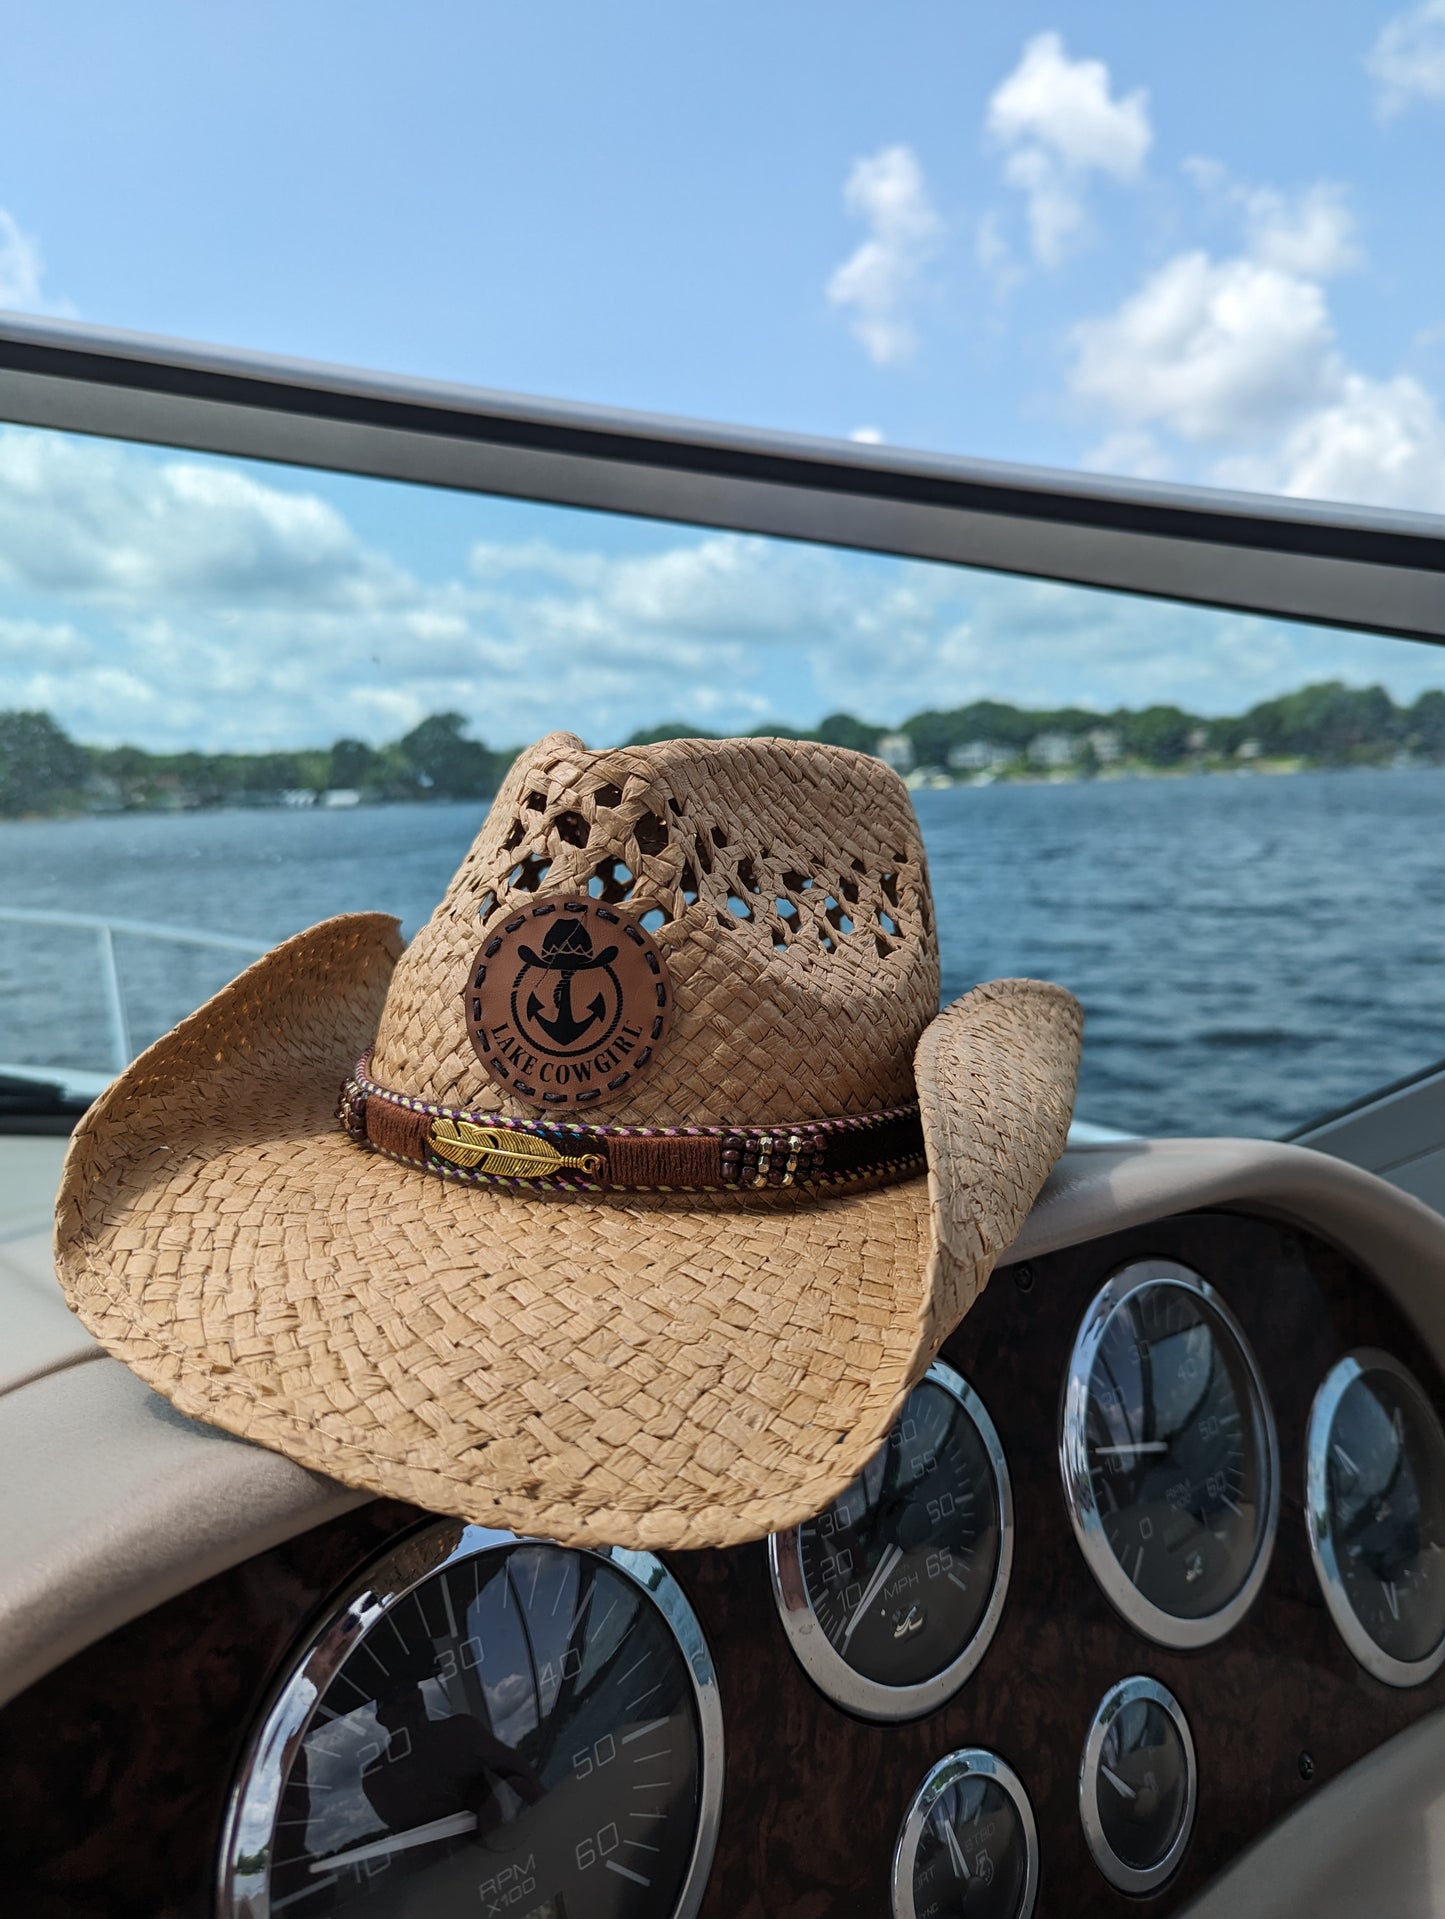 Photo of a Lake Cowgirl Signature Cowboy Hat with Feather Band (Tea Colored) – Shown on a boat console on Lake Minnetonka.